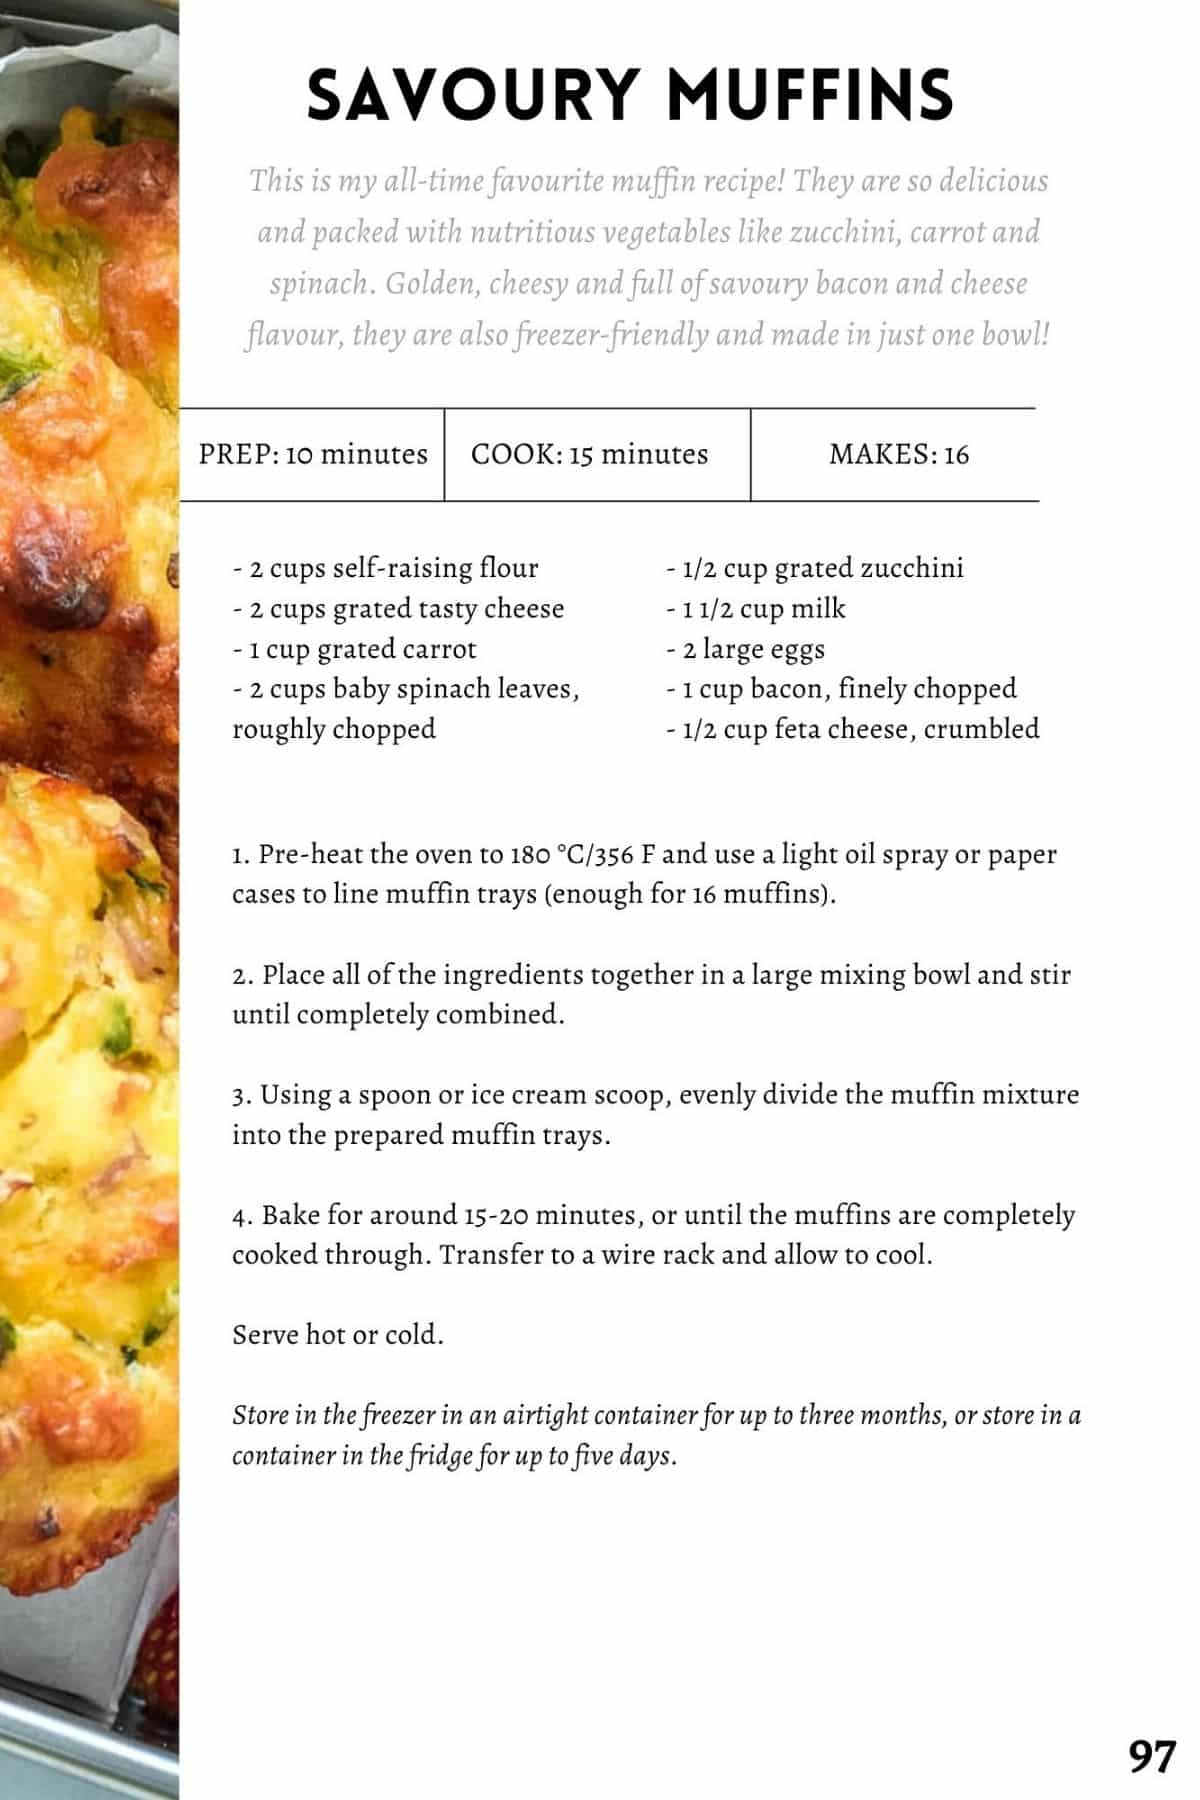 a recipe page from an ebook showing how to make savoury muffins